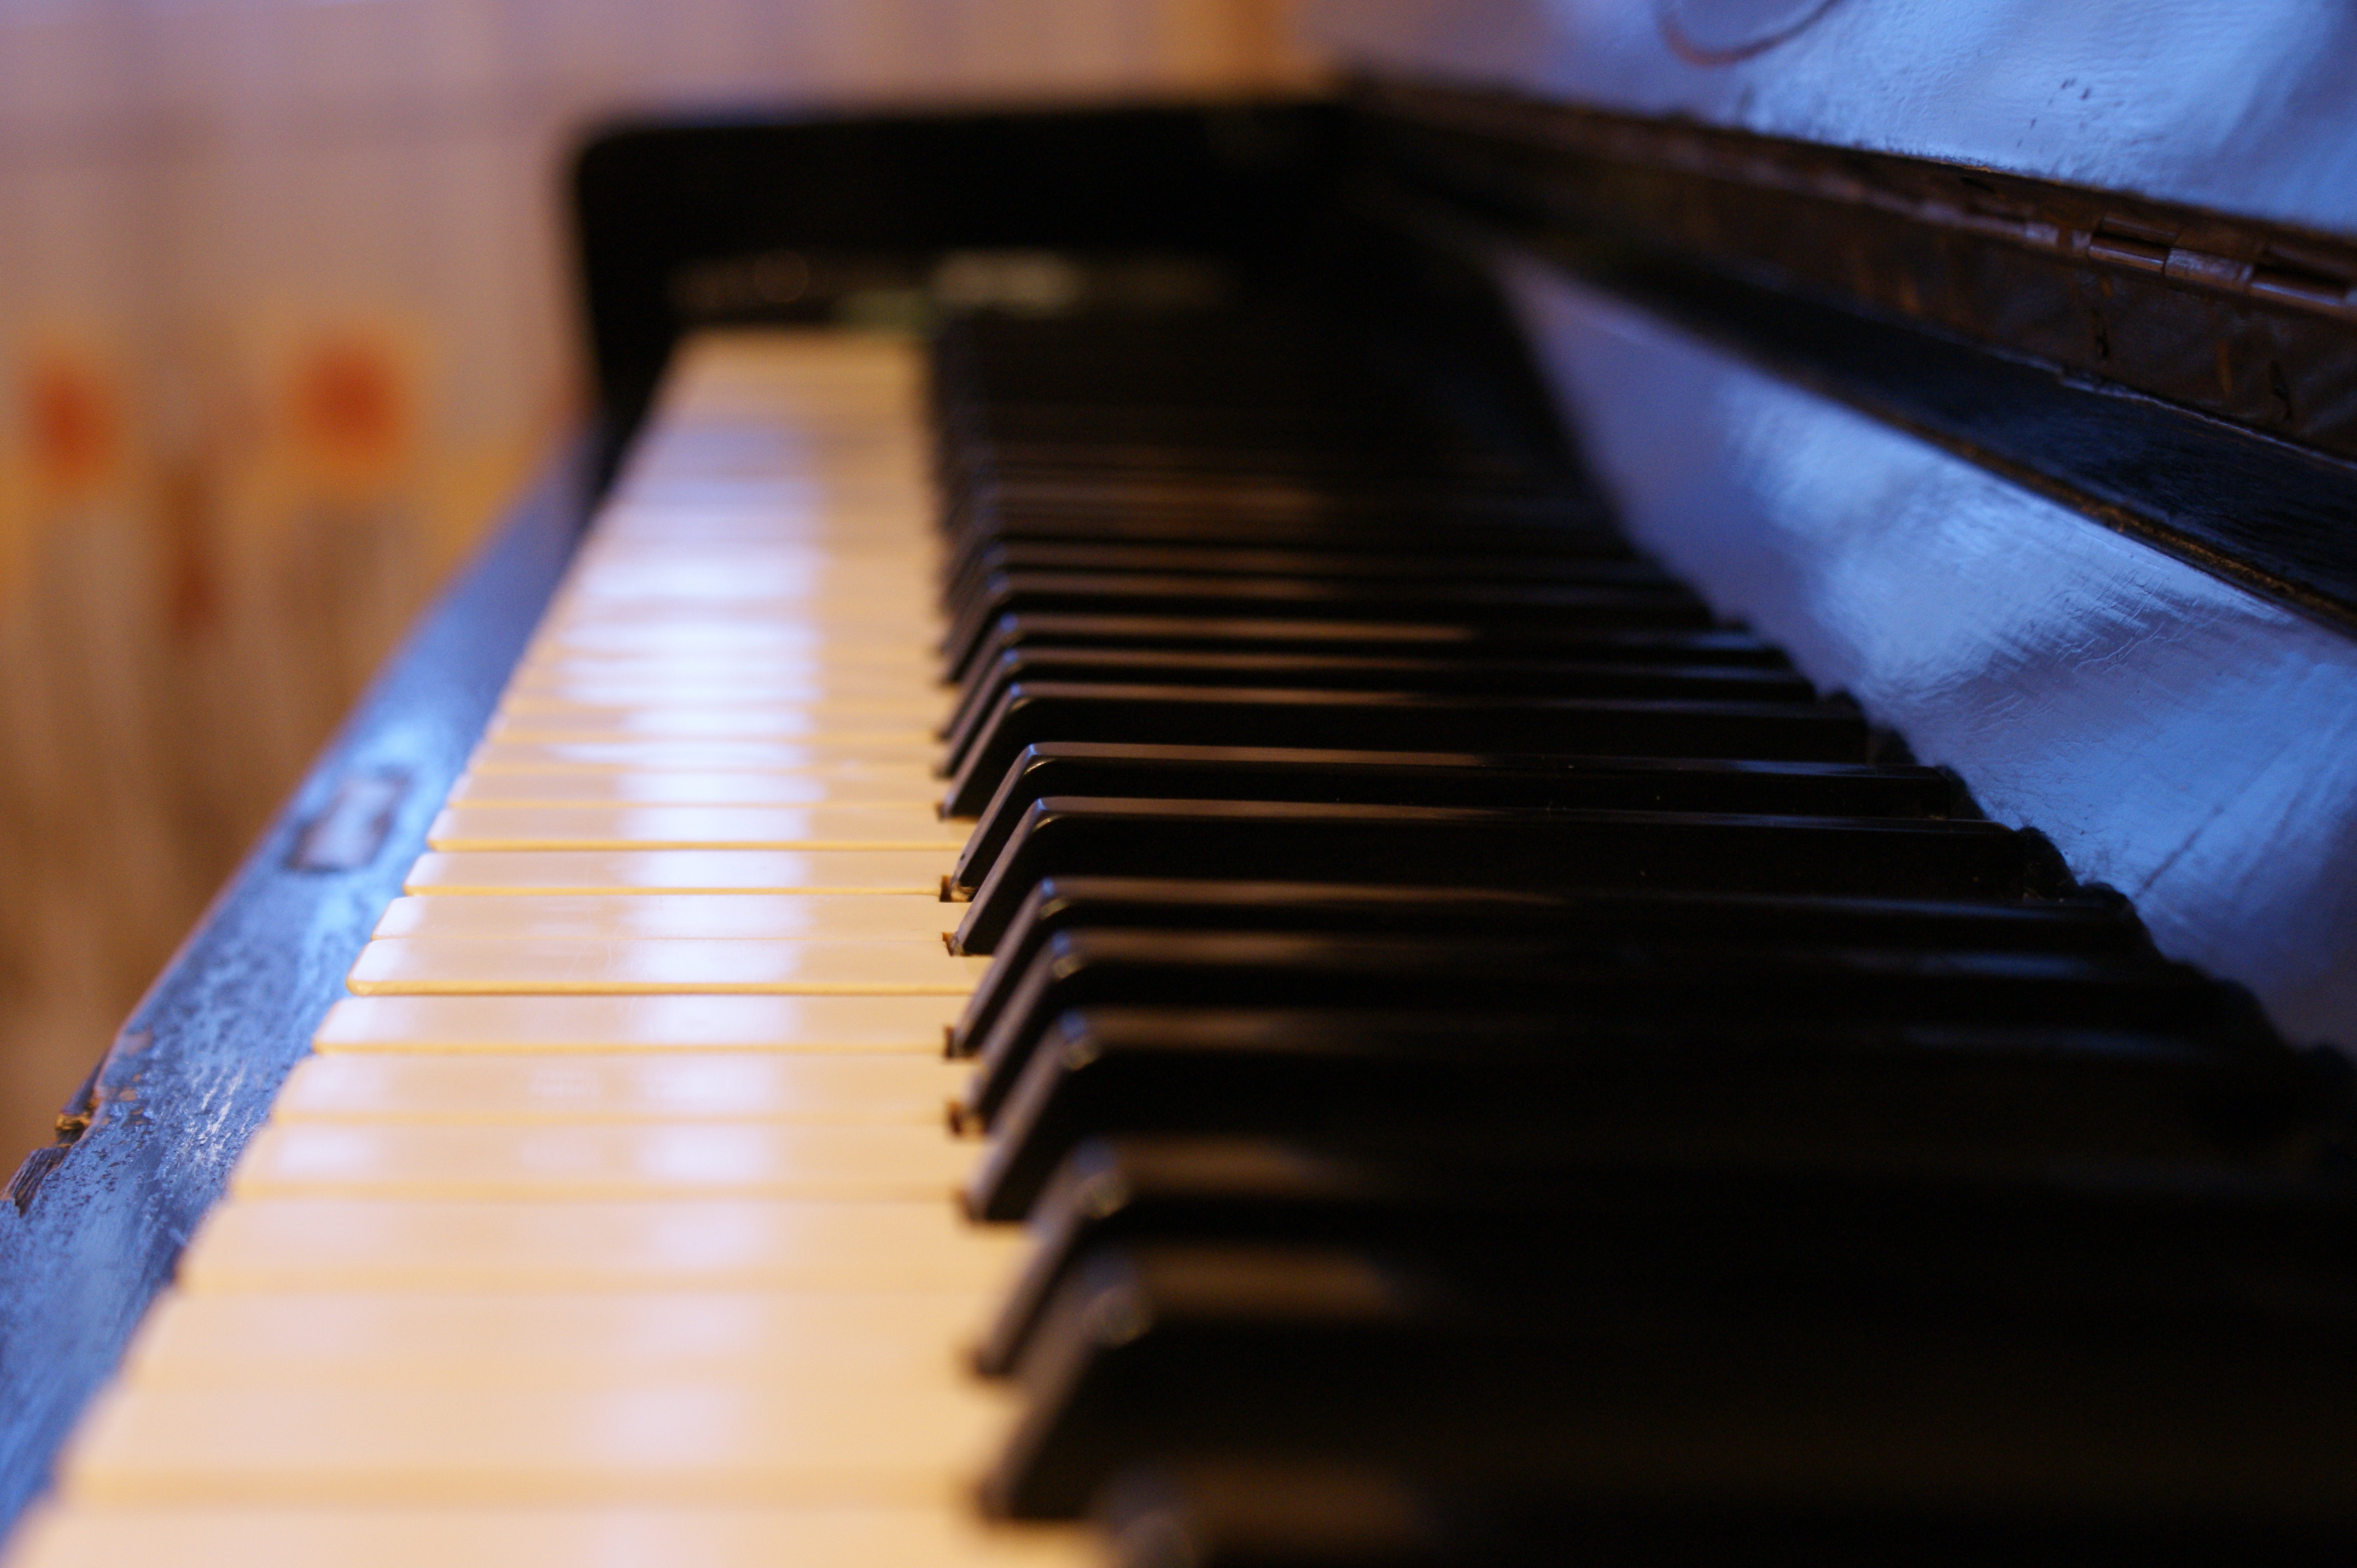 4k ultra hd desktop wallpaper of a piano with musical theme